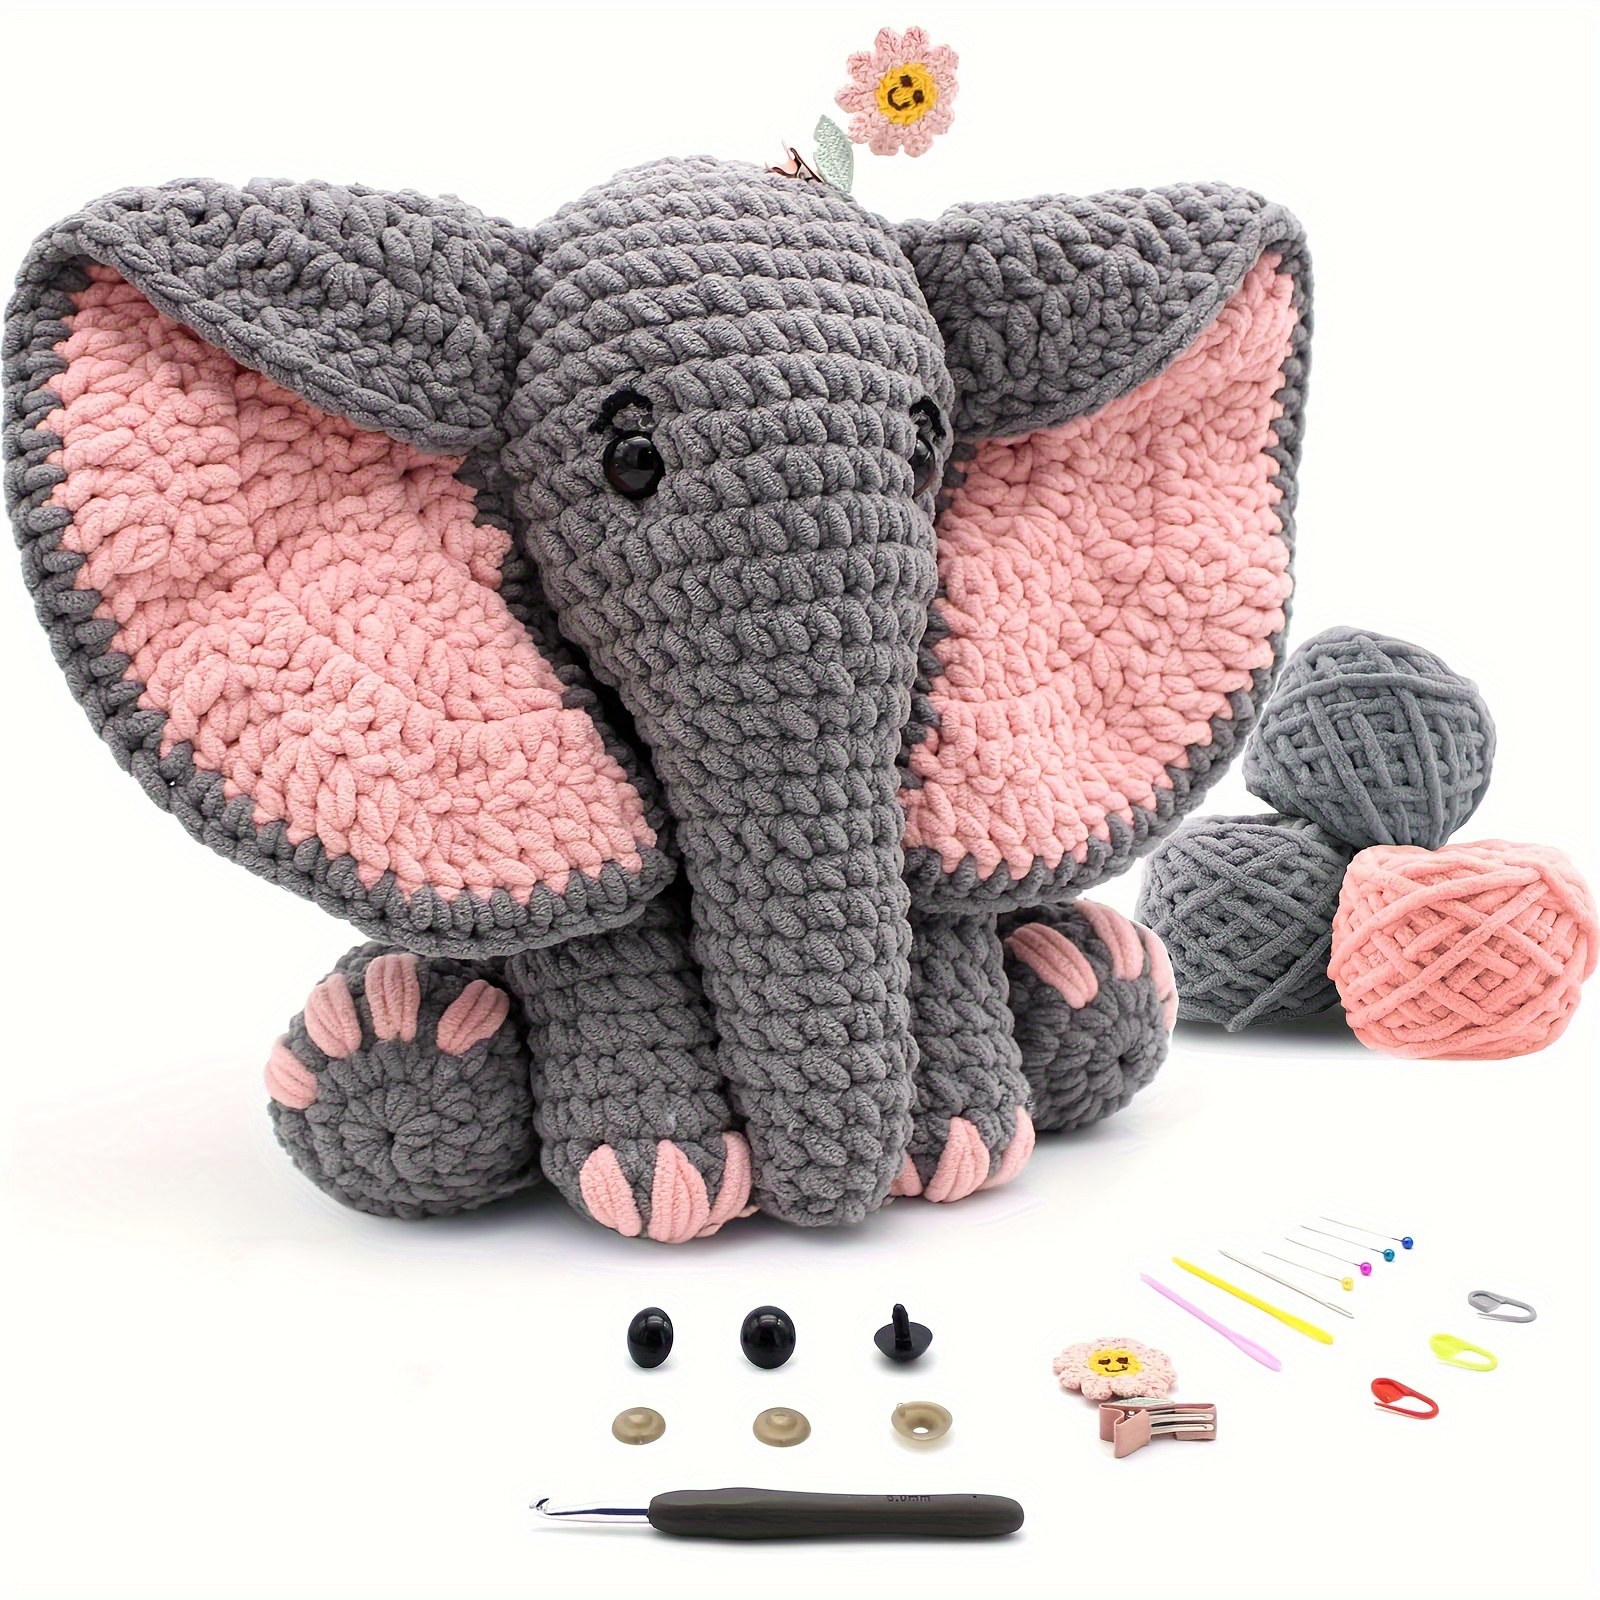 

Crochet Starter Kit For Beginners - 13in Elephant Animal Crochet Kit With Yarn Sets, Amigurumi Crafting Tools & Supplies, Includes Step-by-step Video Tutorials - Perfect Gift For Adults